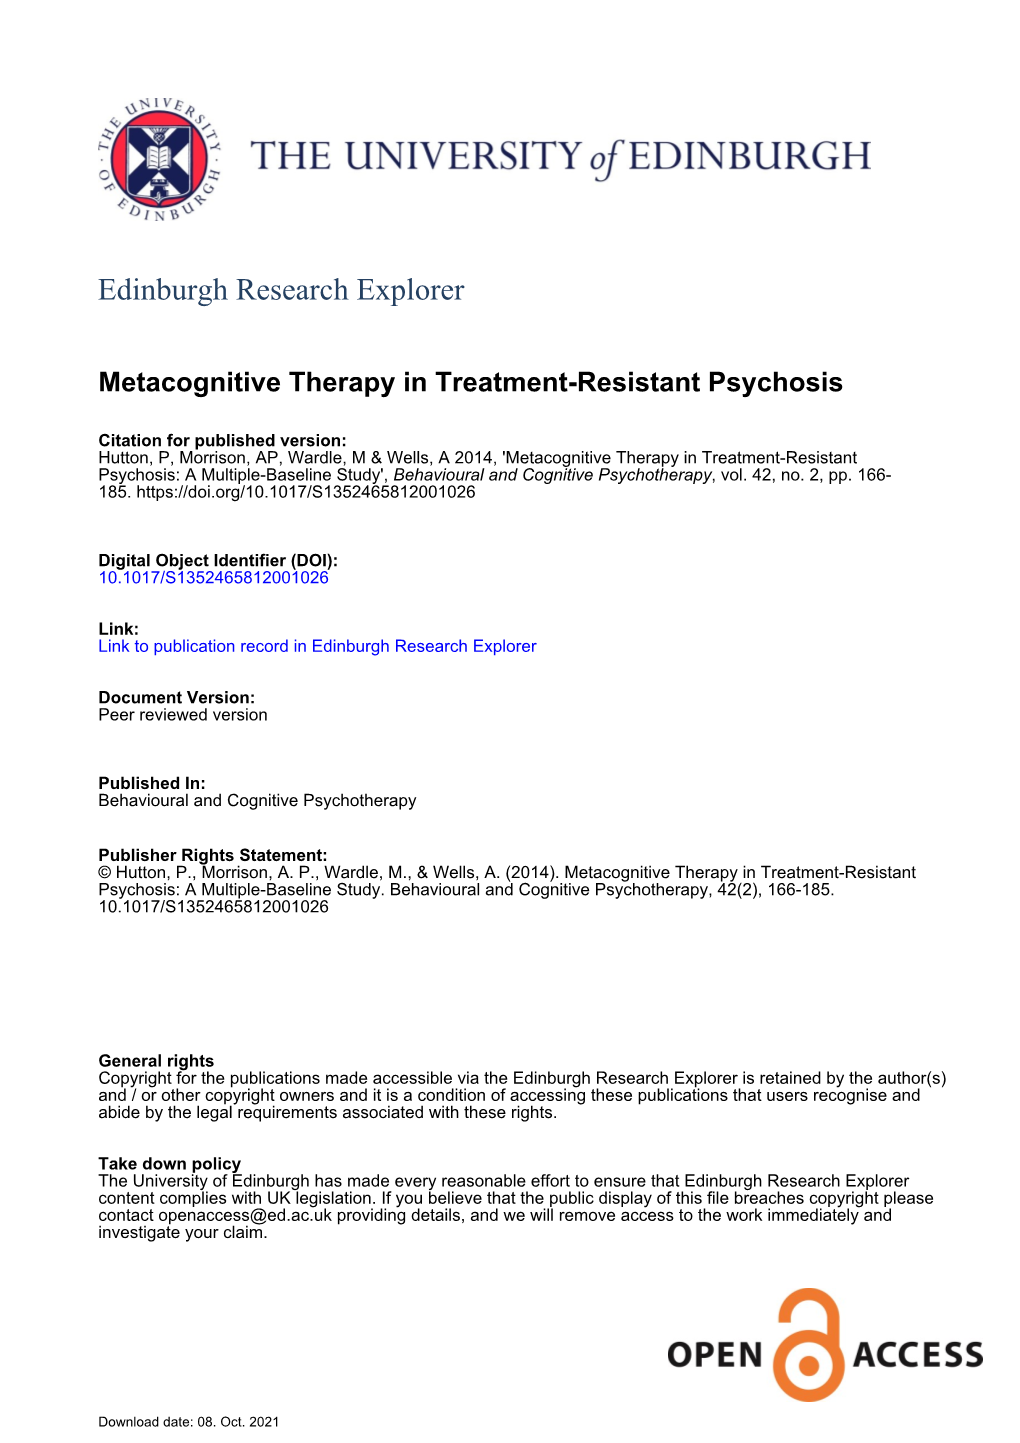 Metacognitive Therapy for Treatment-Resistant